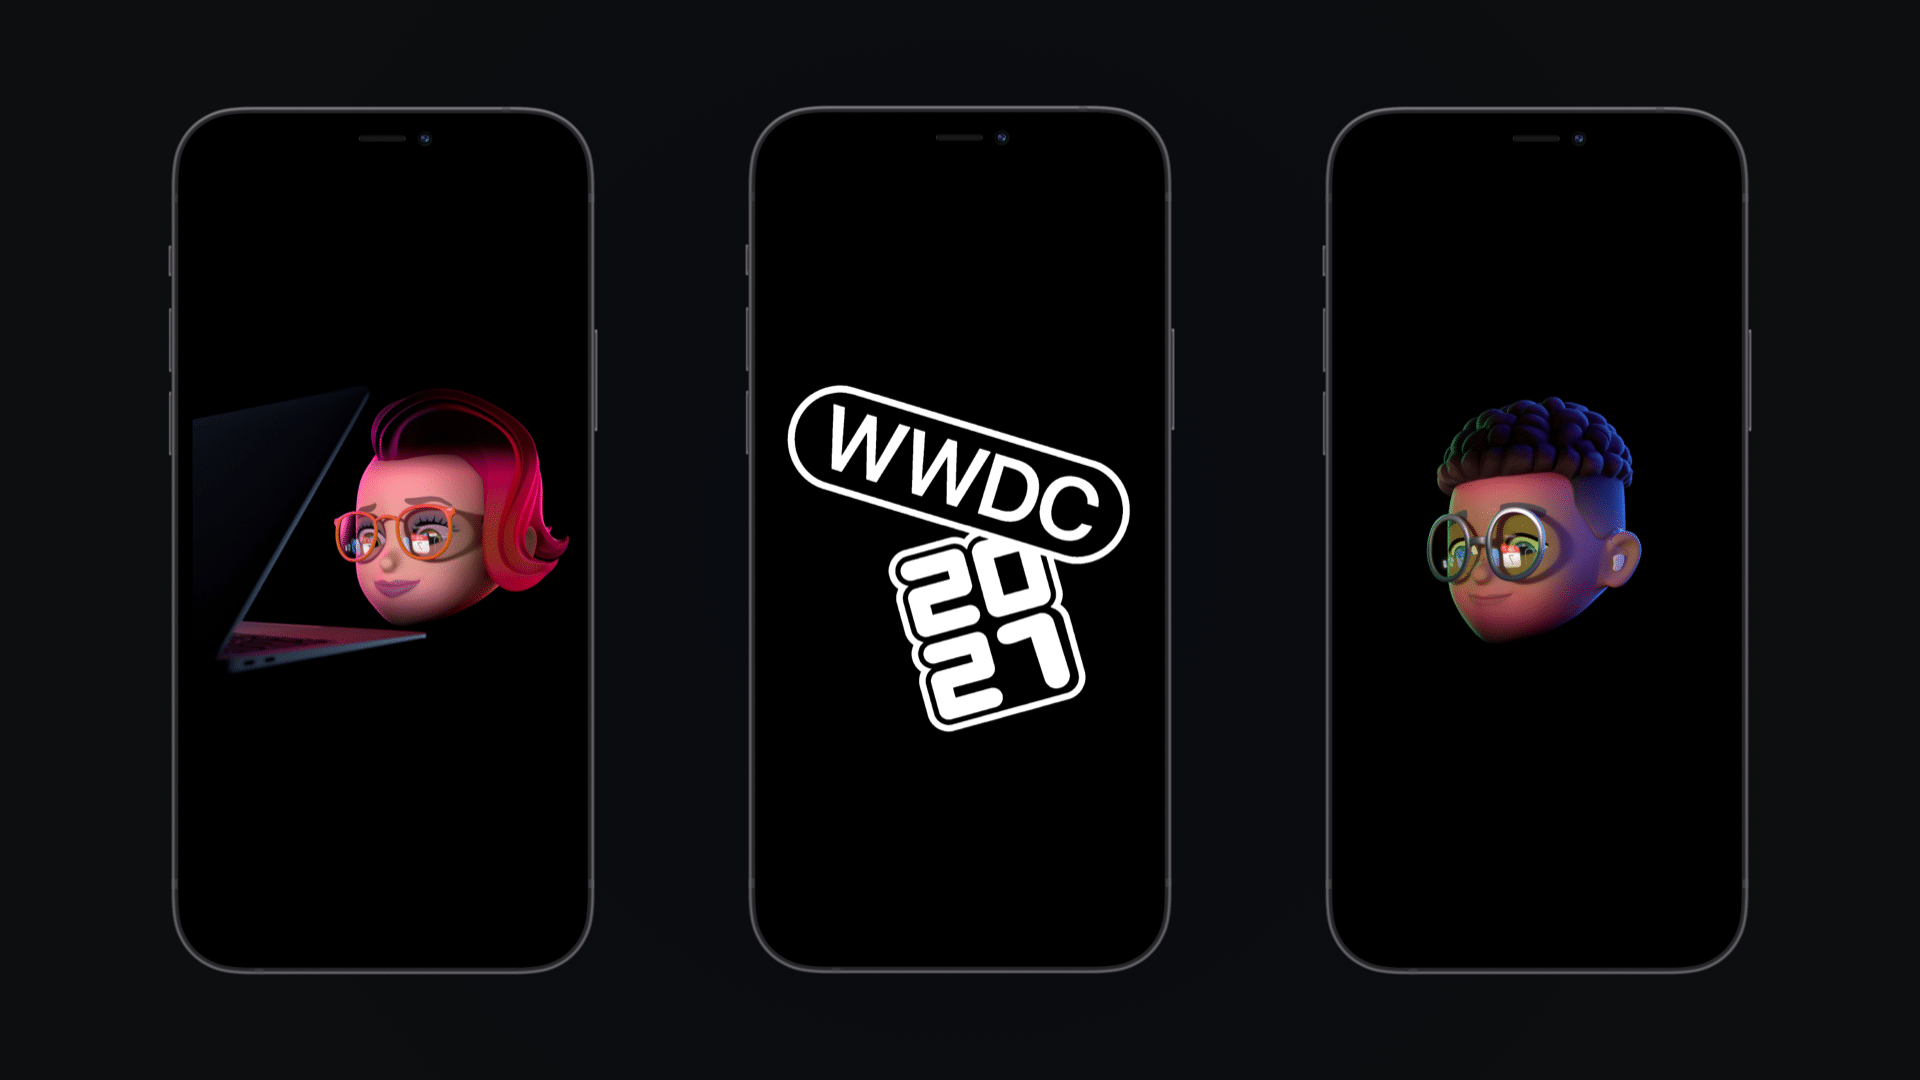 Download WWDC 2021 Wallpapers for iPhone, iPad, and Mac